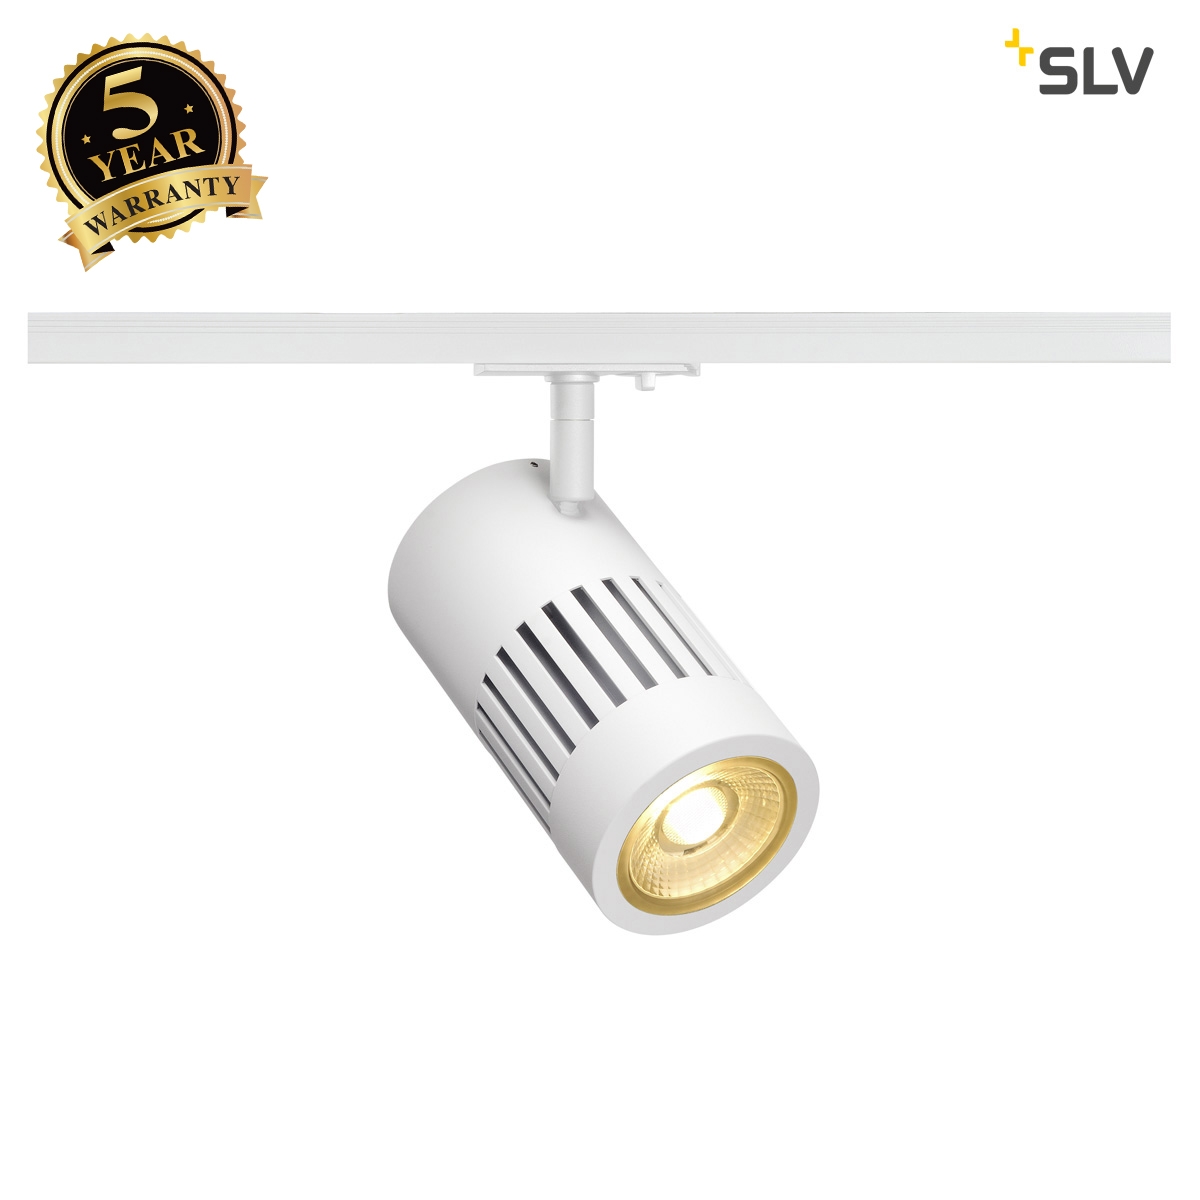 SLV STRUCTEC LED 24W, round, white, 3000K, 36, incl. 1-circuit adapter 1000975